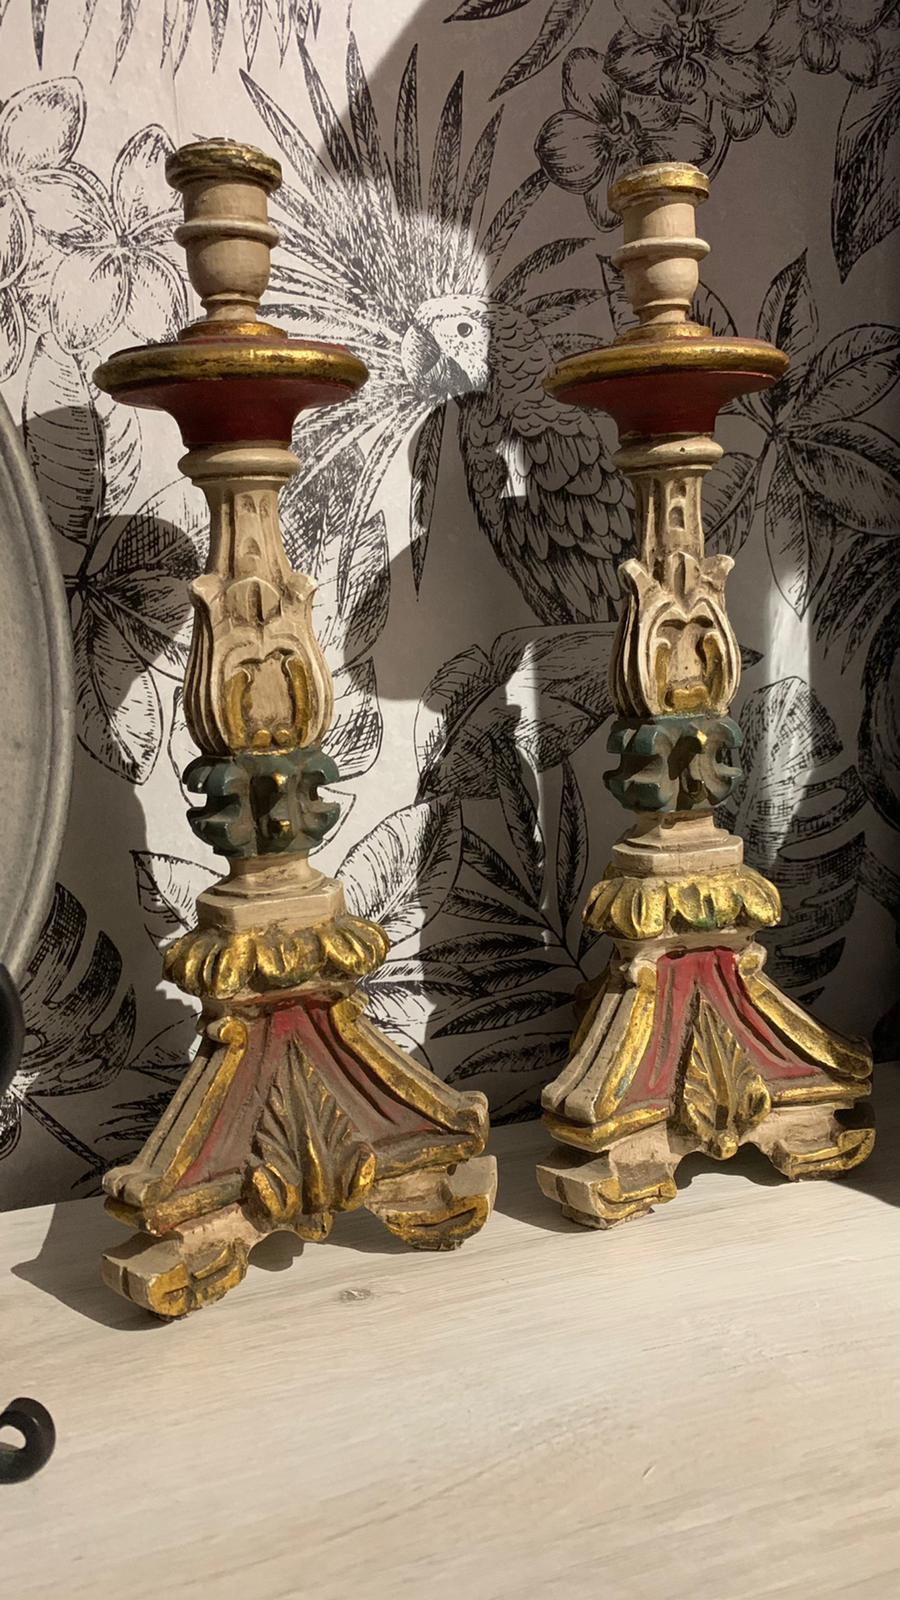 19th Century Pair of Torch Holders
Portuguese, in carved, painted and gilded wood, electrified. With velvet lace lampshades. 
Small defects.
Dim.: 68 cm.
Good condition.